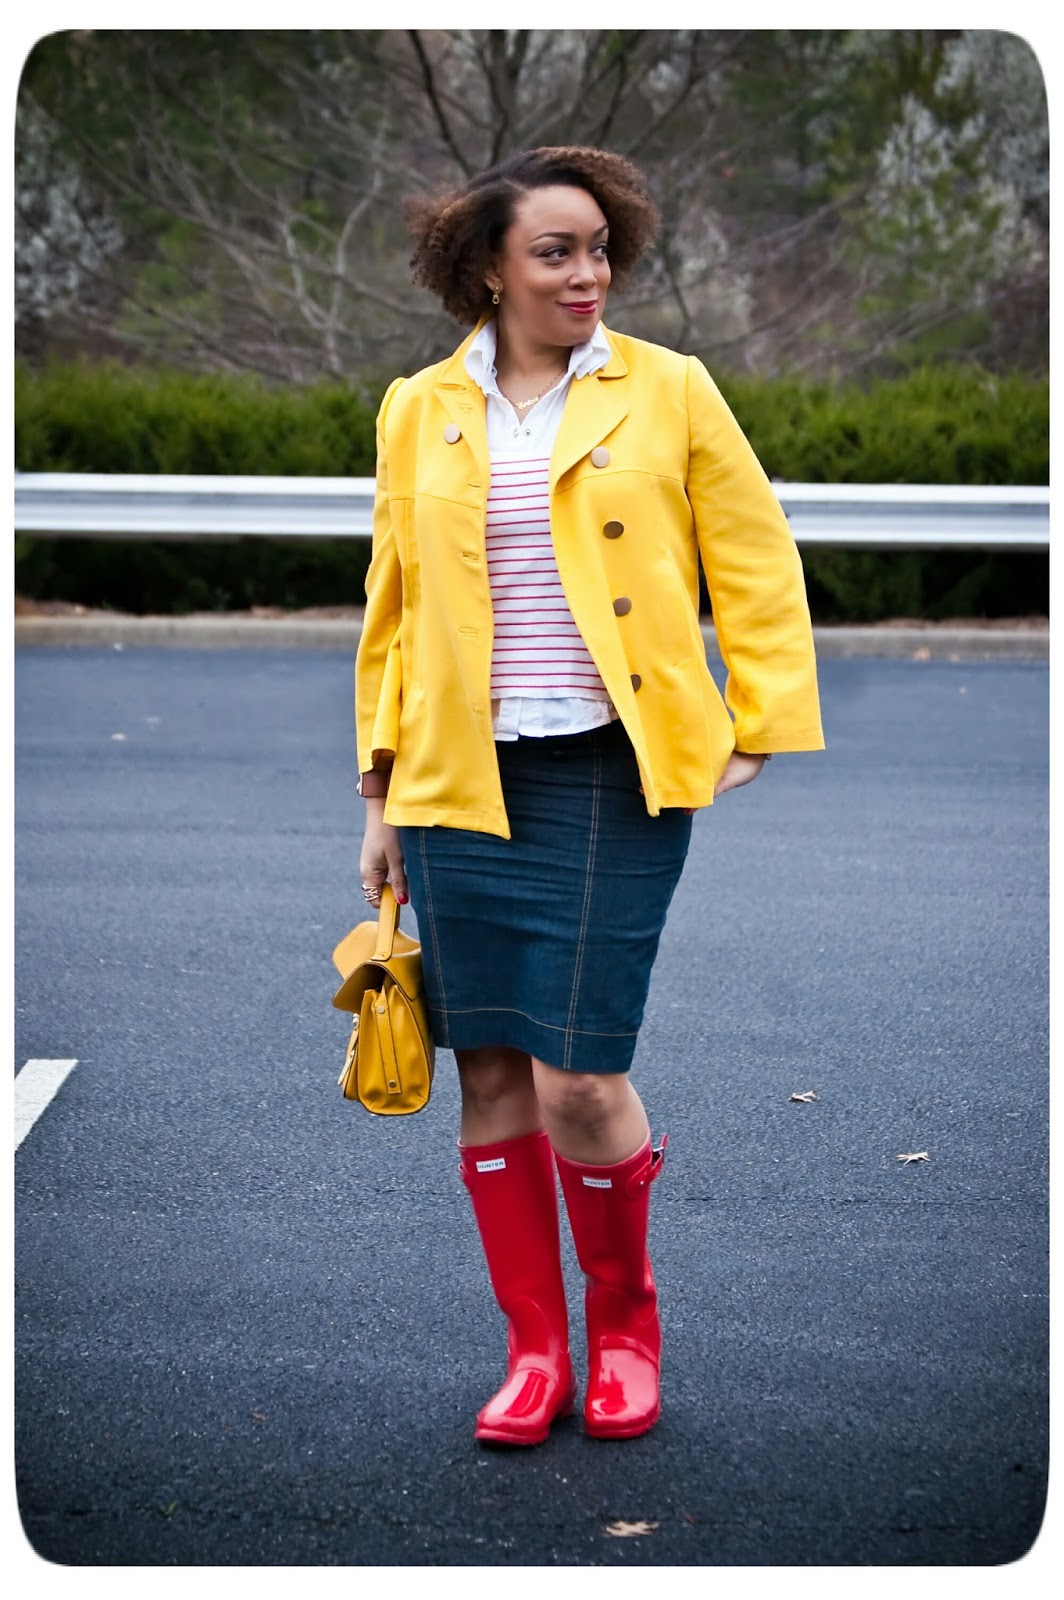 Rainy Day Outfit | Yellow Trench Jacket and Red Hunter Boots - Erica B.'s - DIY Style!